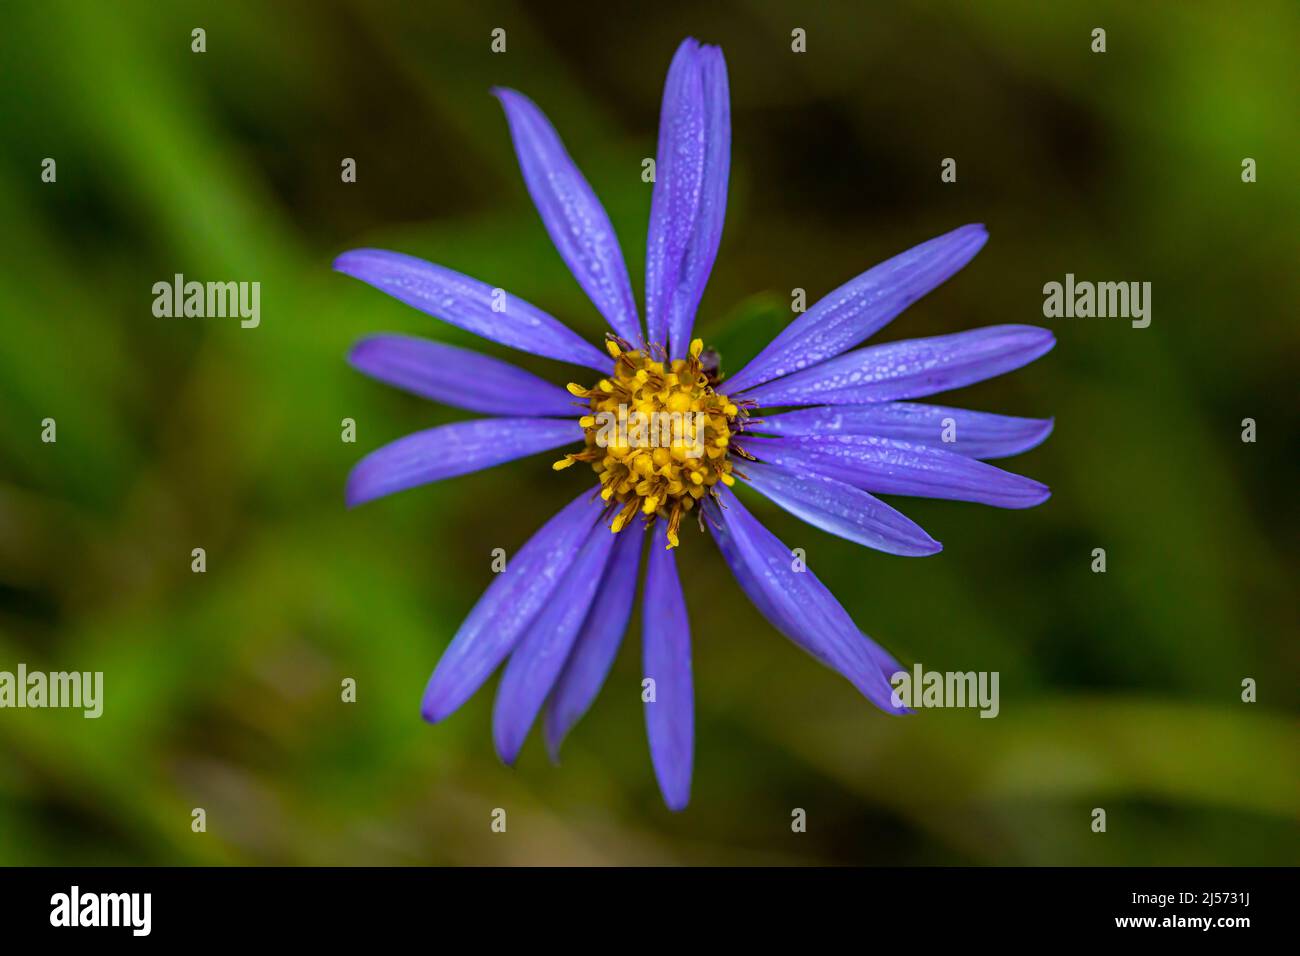 Aster amellus flower growing in mountains, close up Stock Photo